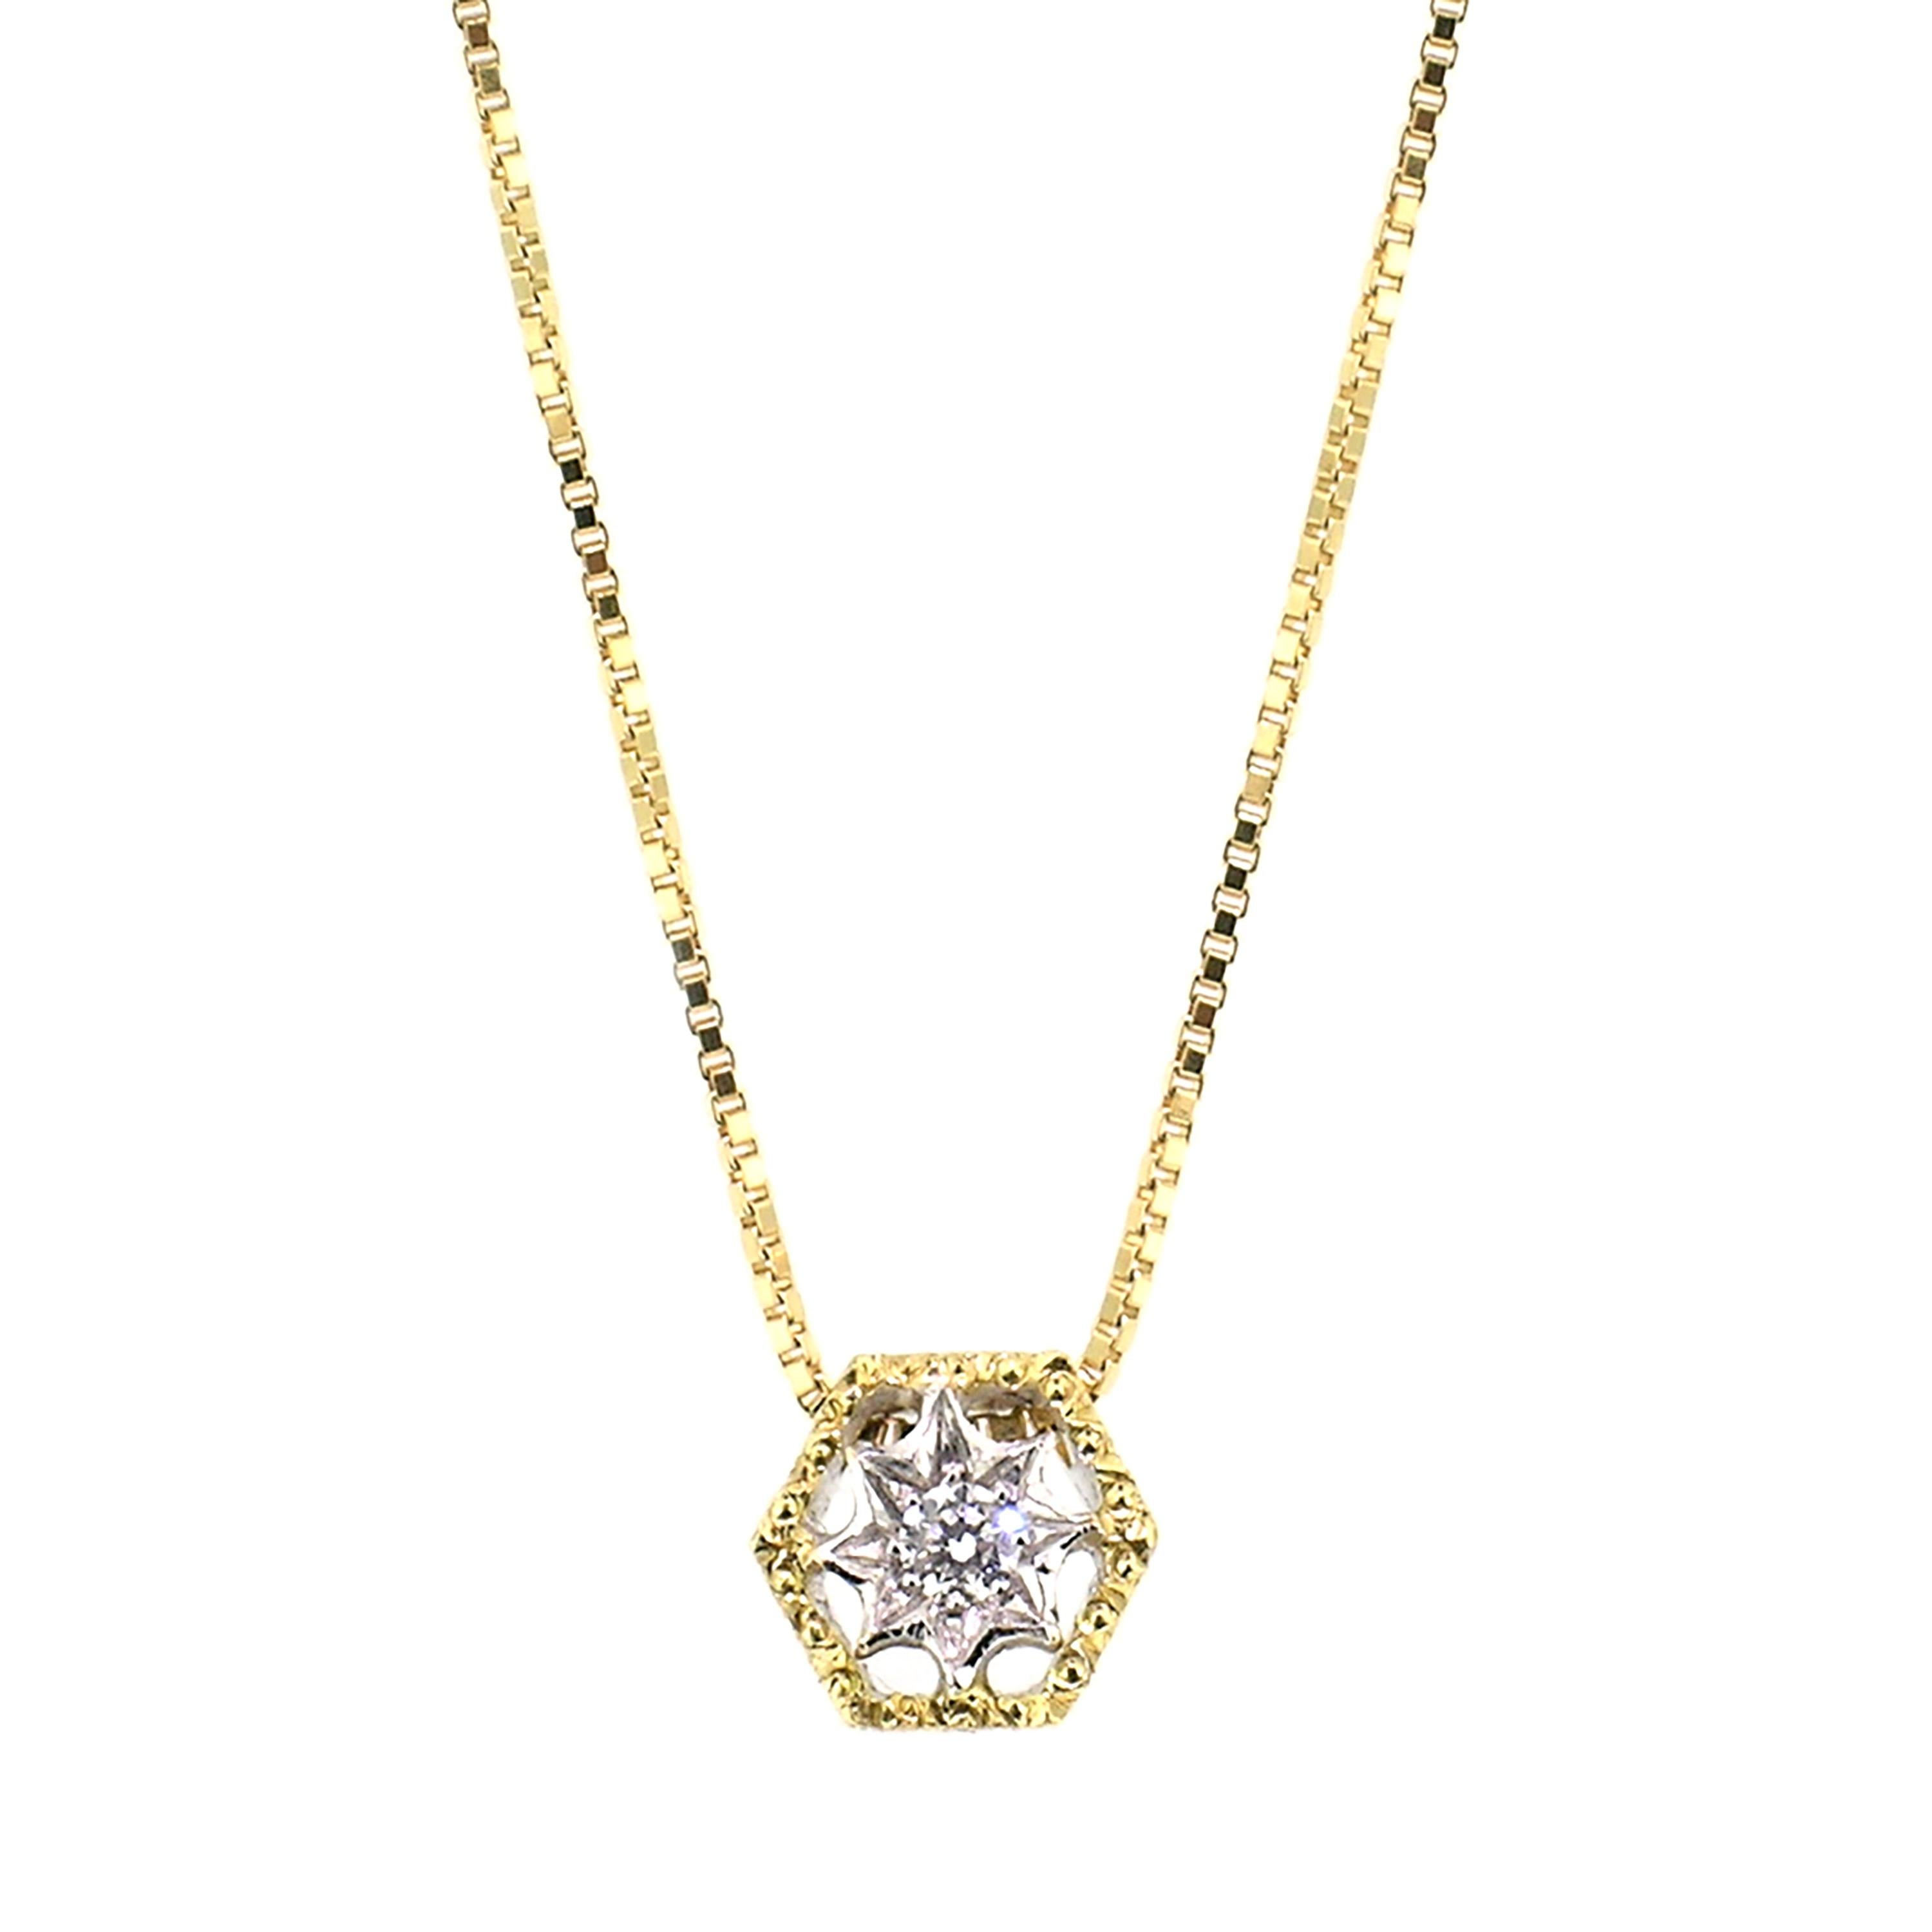 Round Cut 18 Karat and Diamond Pendant Necklace, Handmade and Hand Engraved in Italy